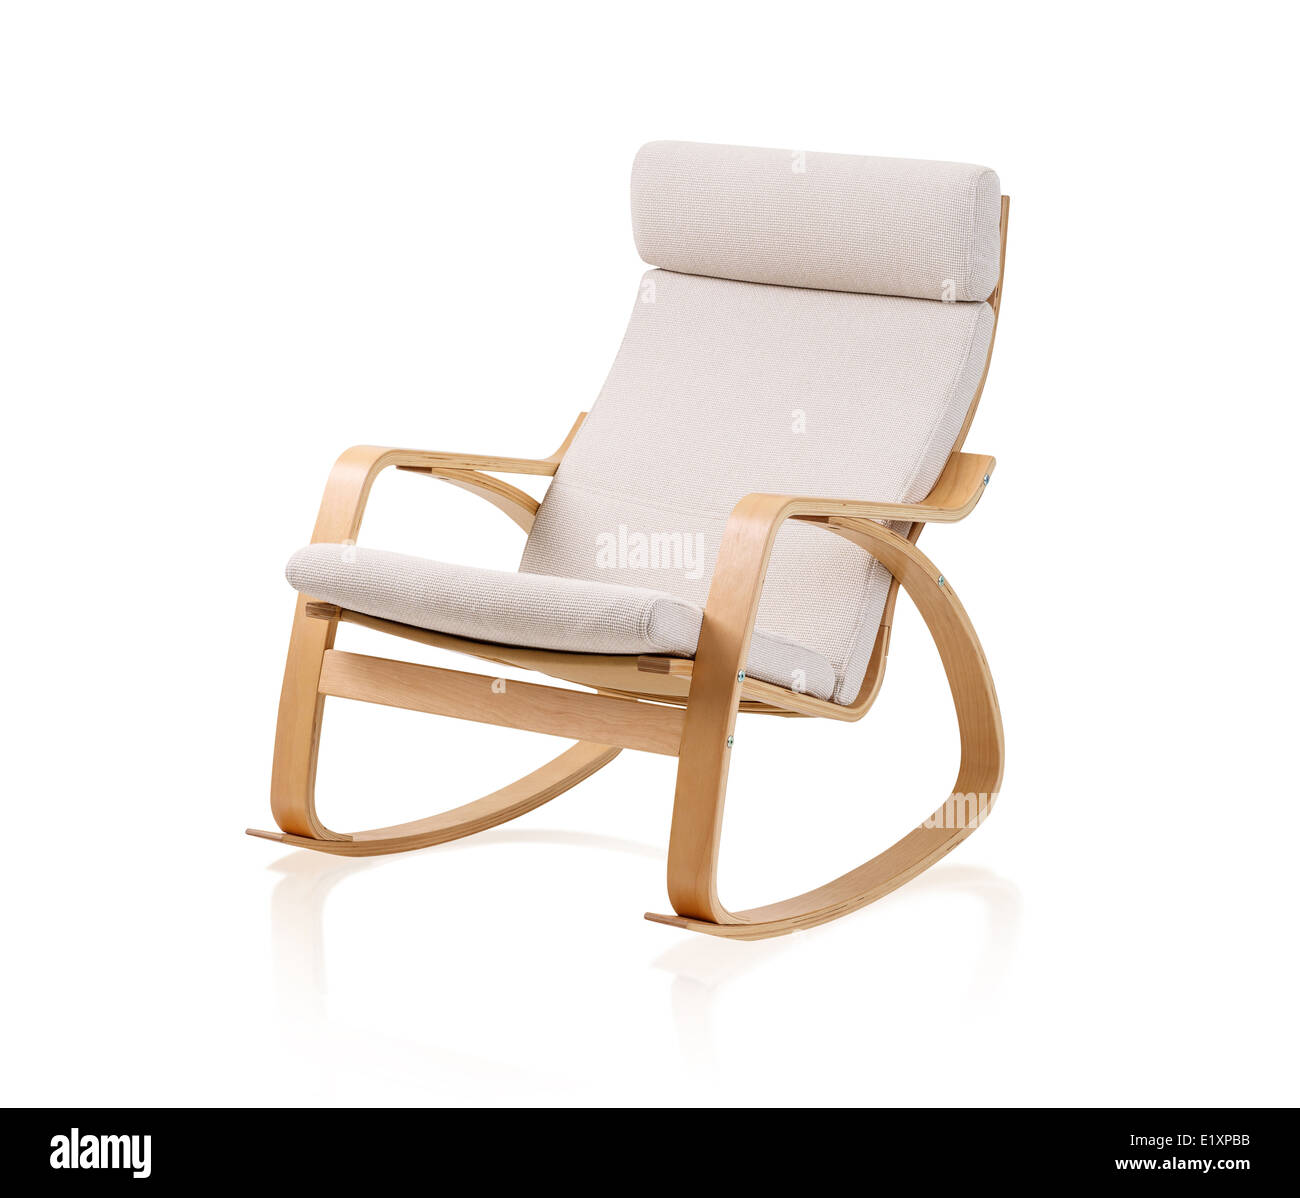 modern rocking chair isolated on white background Stock Photo